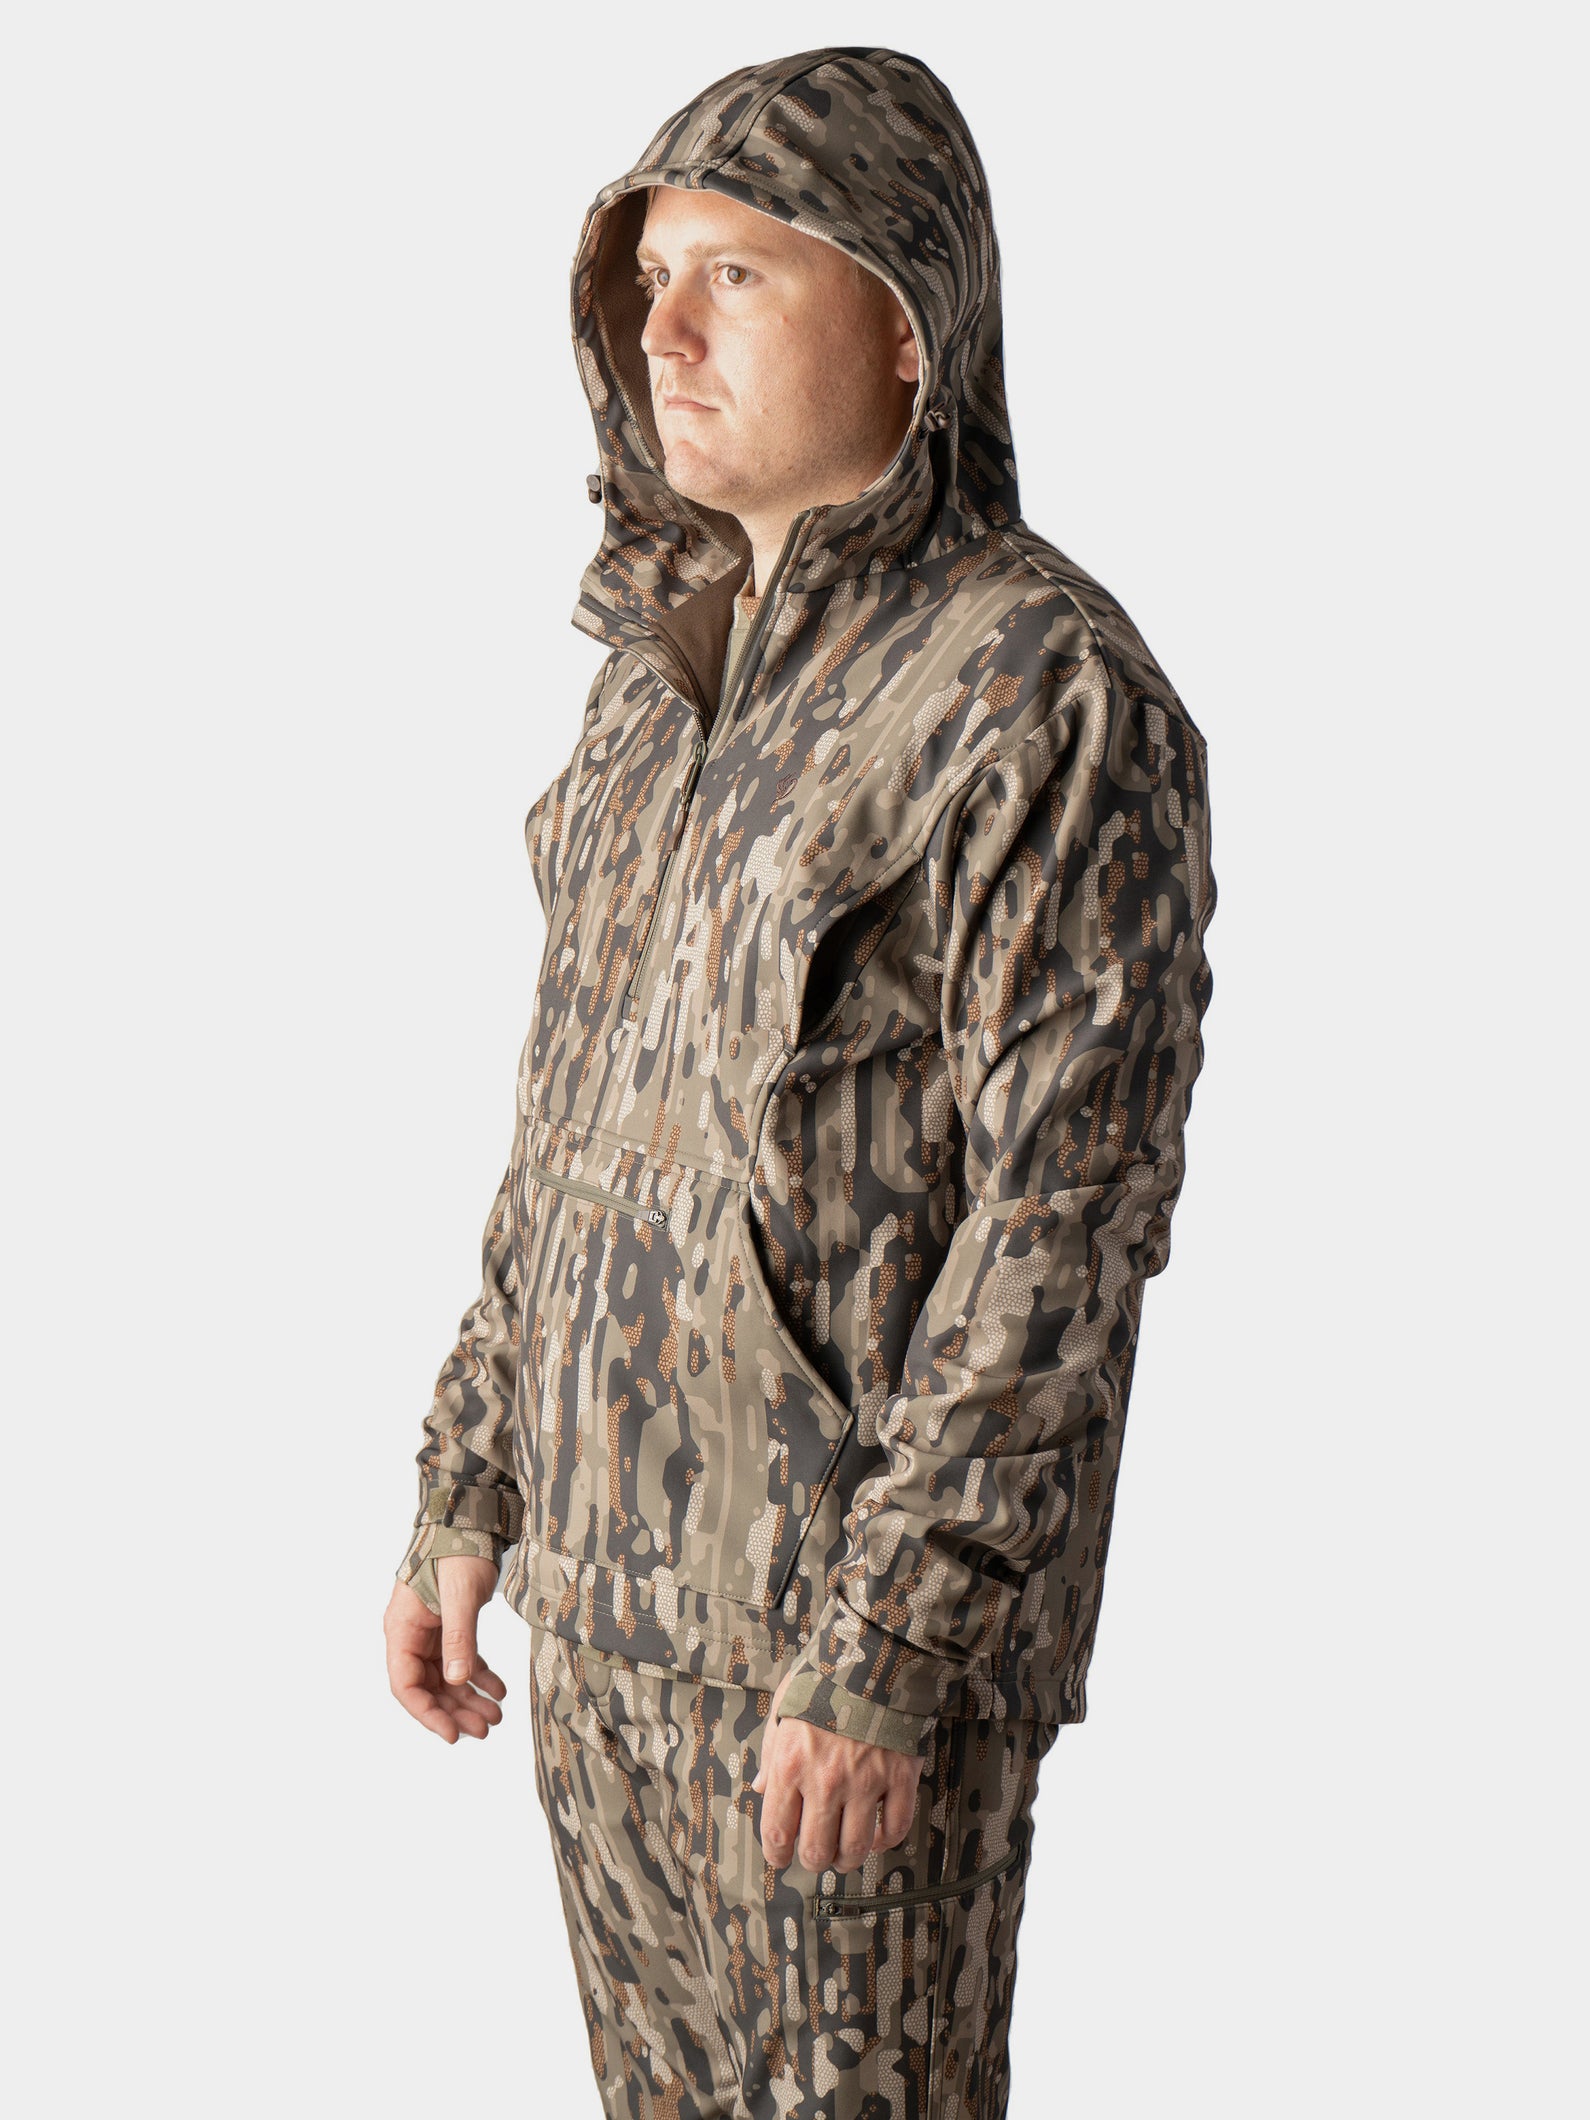 Contact Softshell Hoodie - Woodland